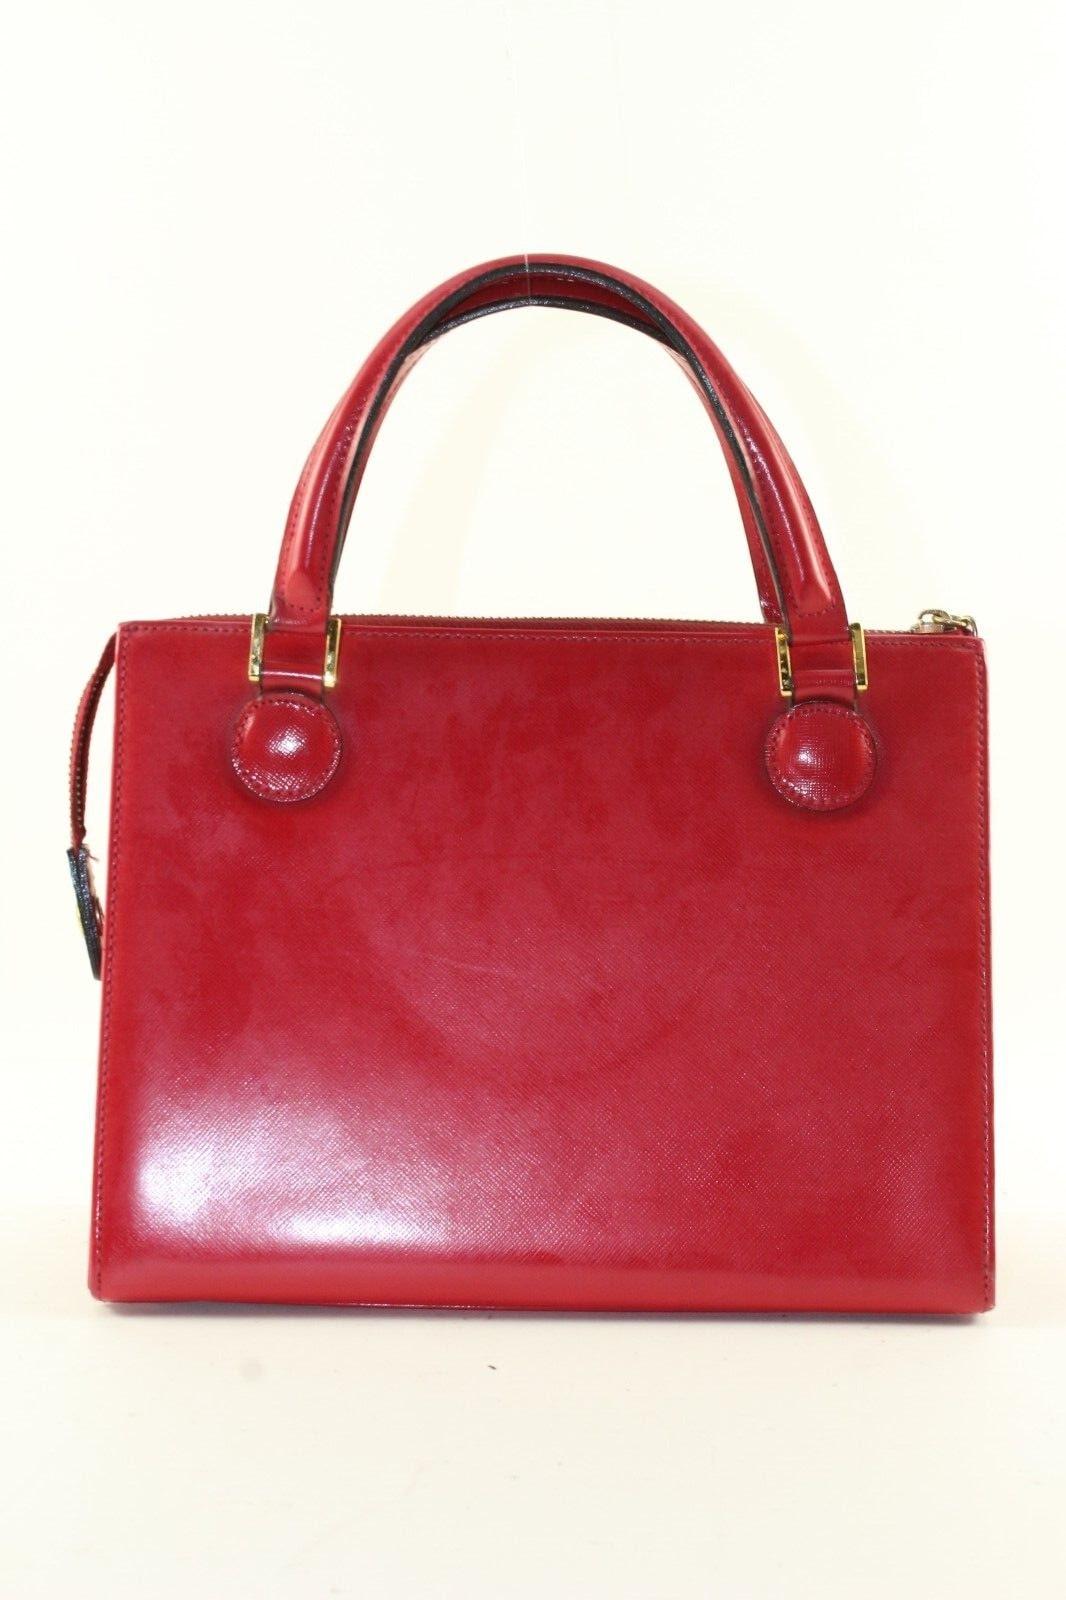 Versace Red Leather Charm Tote 5VER1214K In Fair Condition For Sale In Dix hills, NY